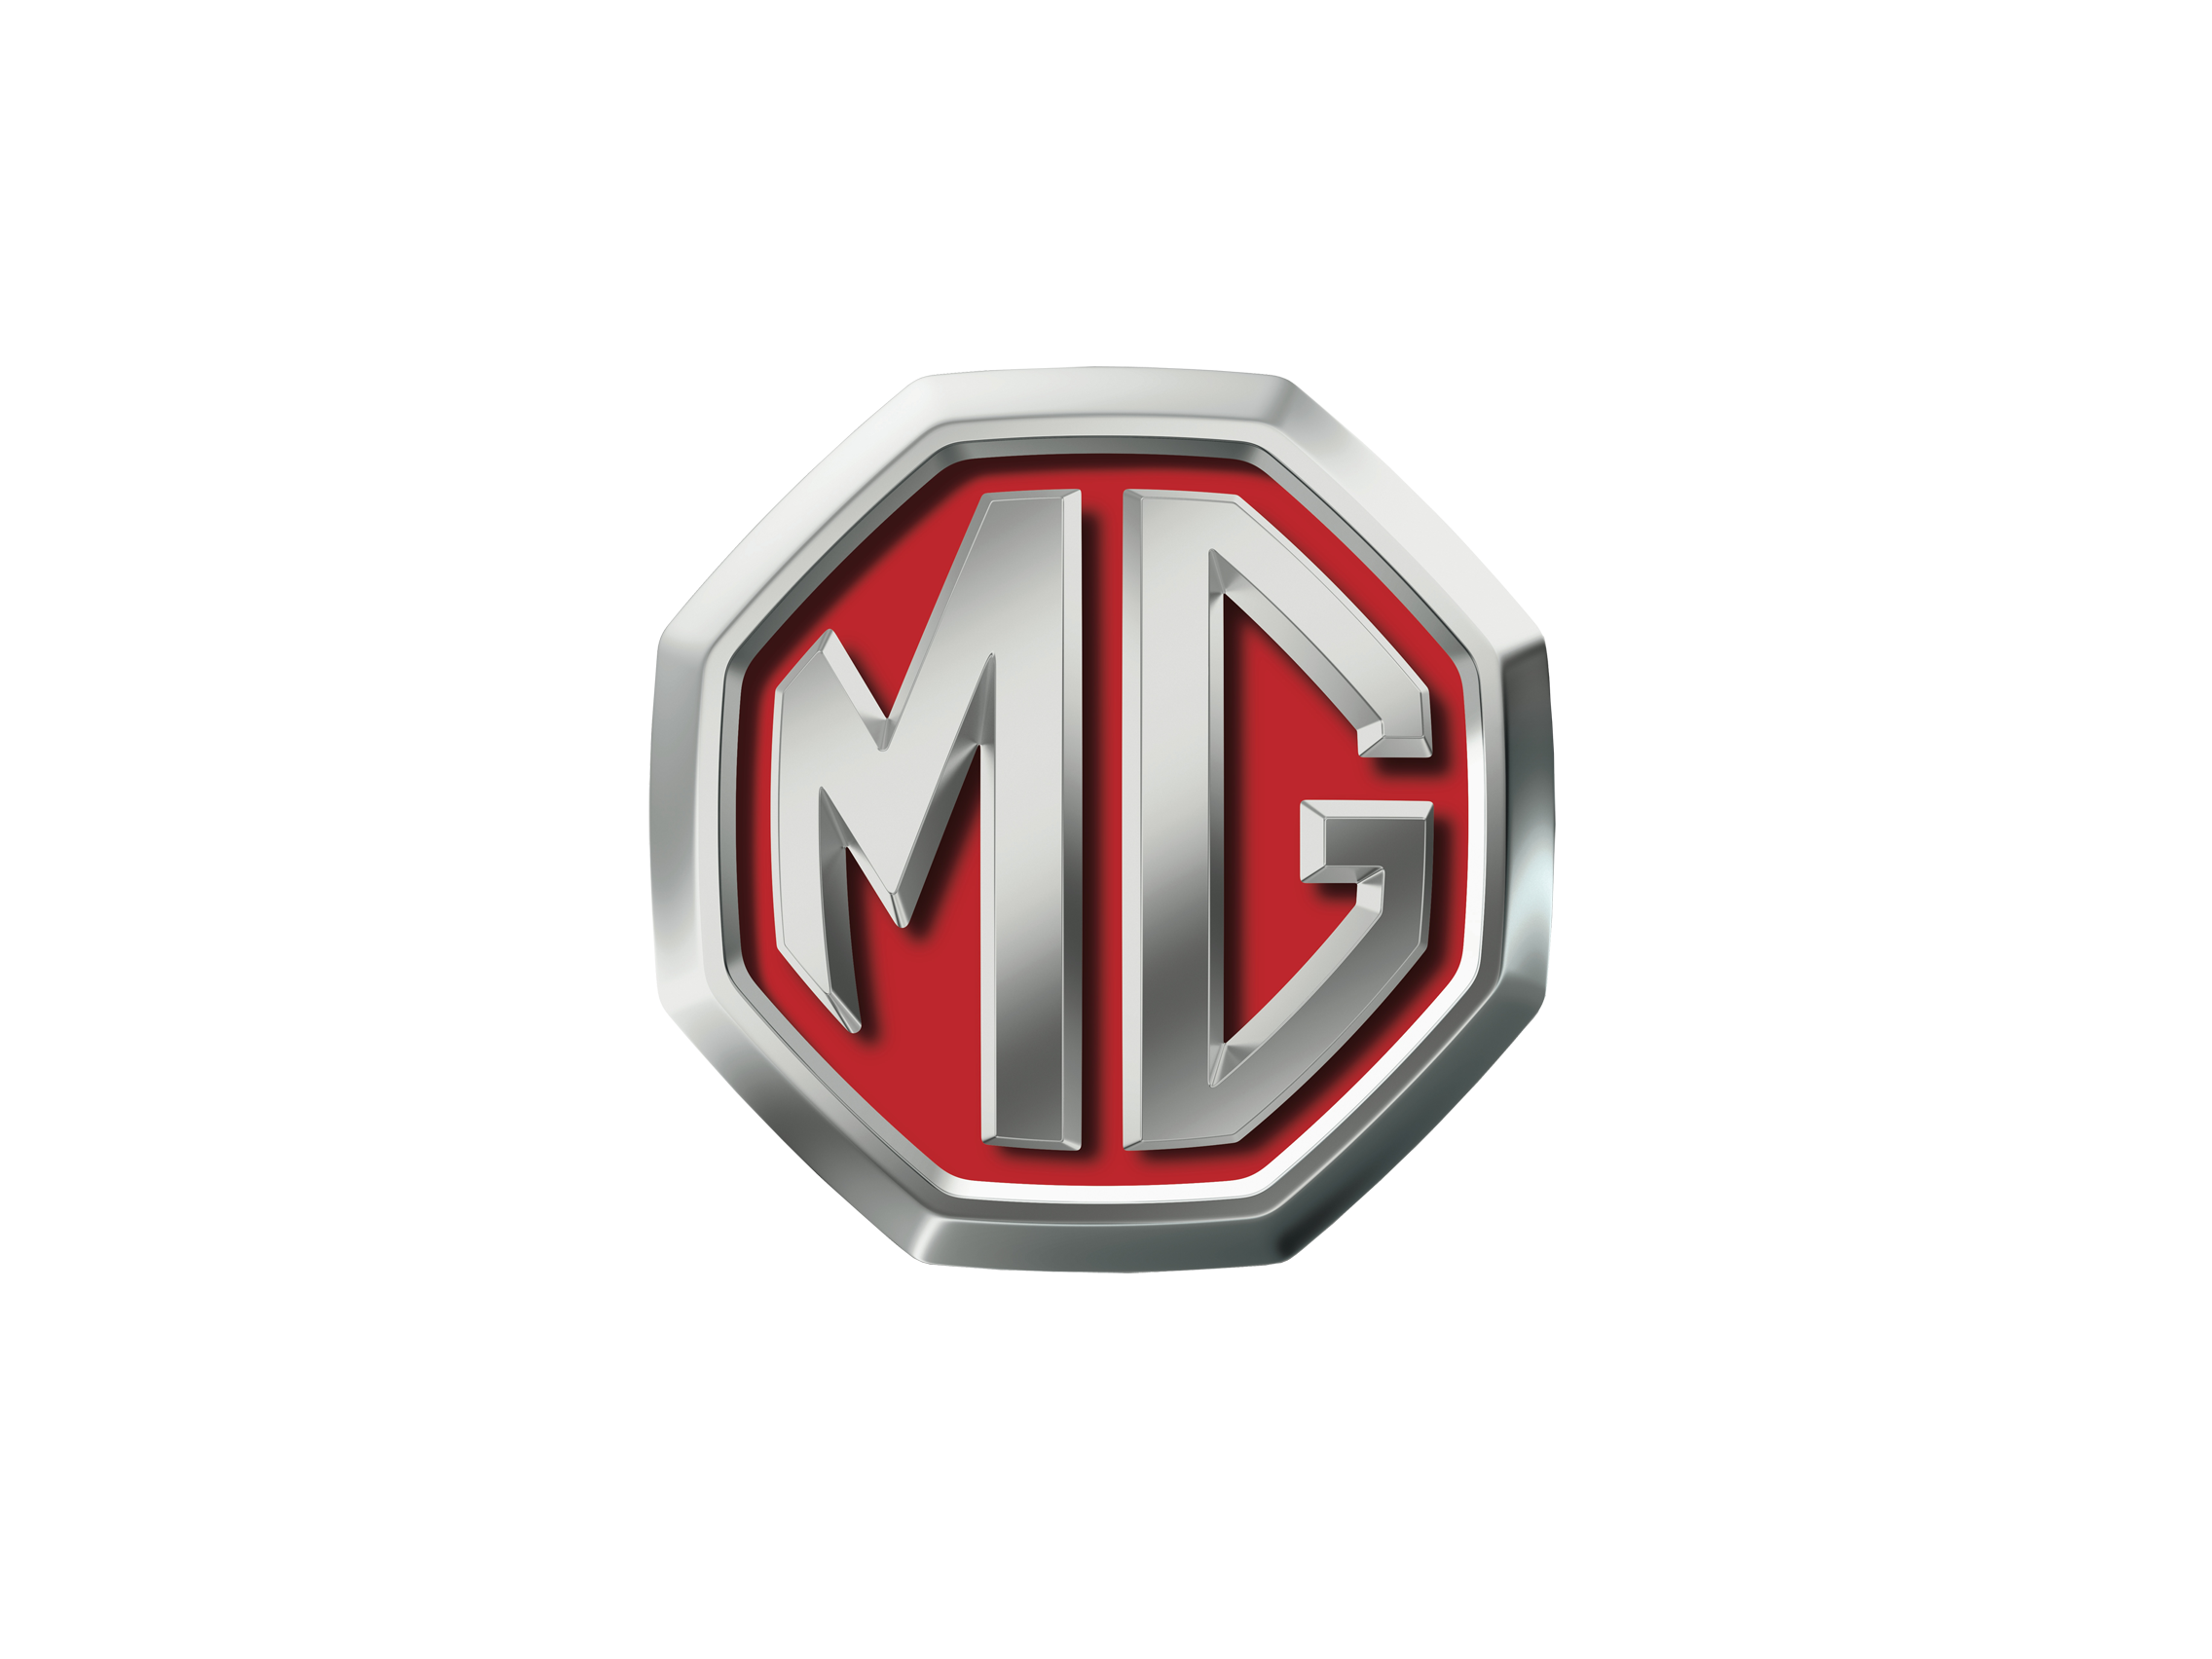 MG-logo-red-2010-1920x1080.png